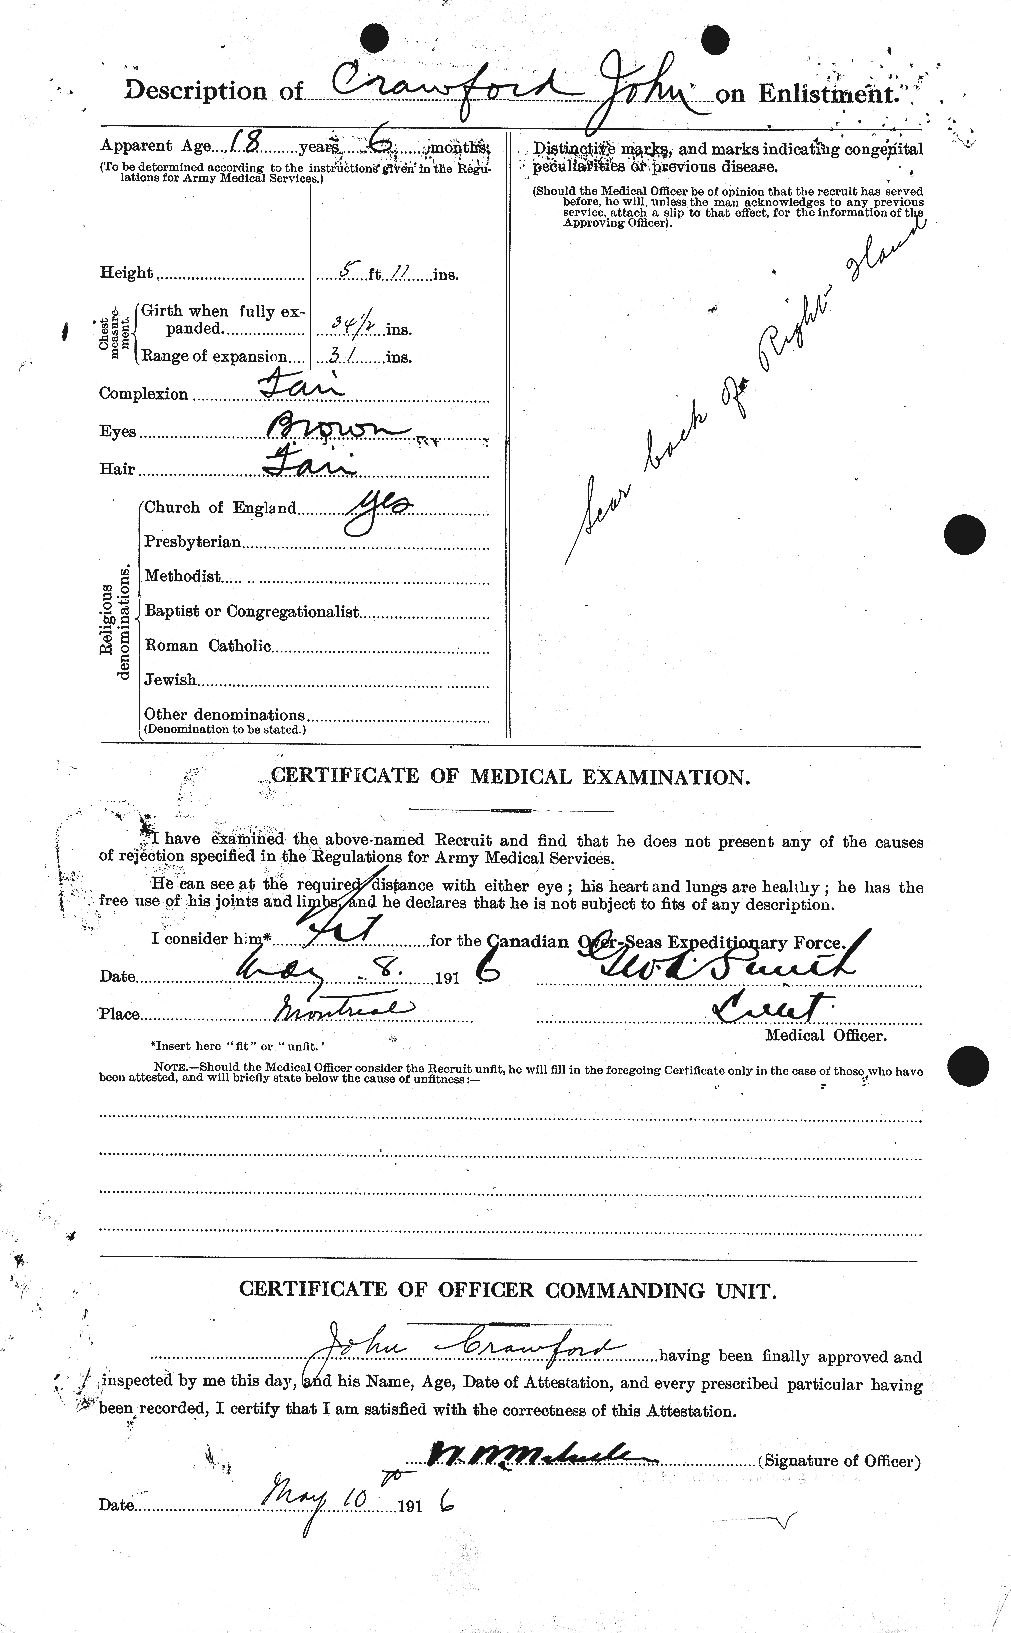 Personnel Records of the First World War - CEF 062453b